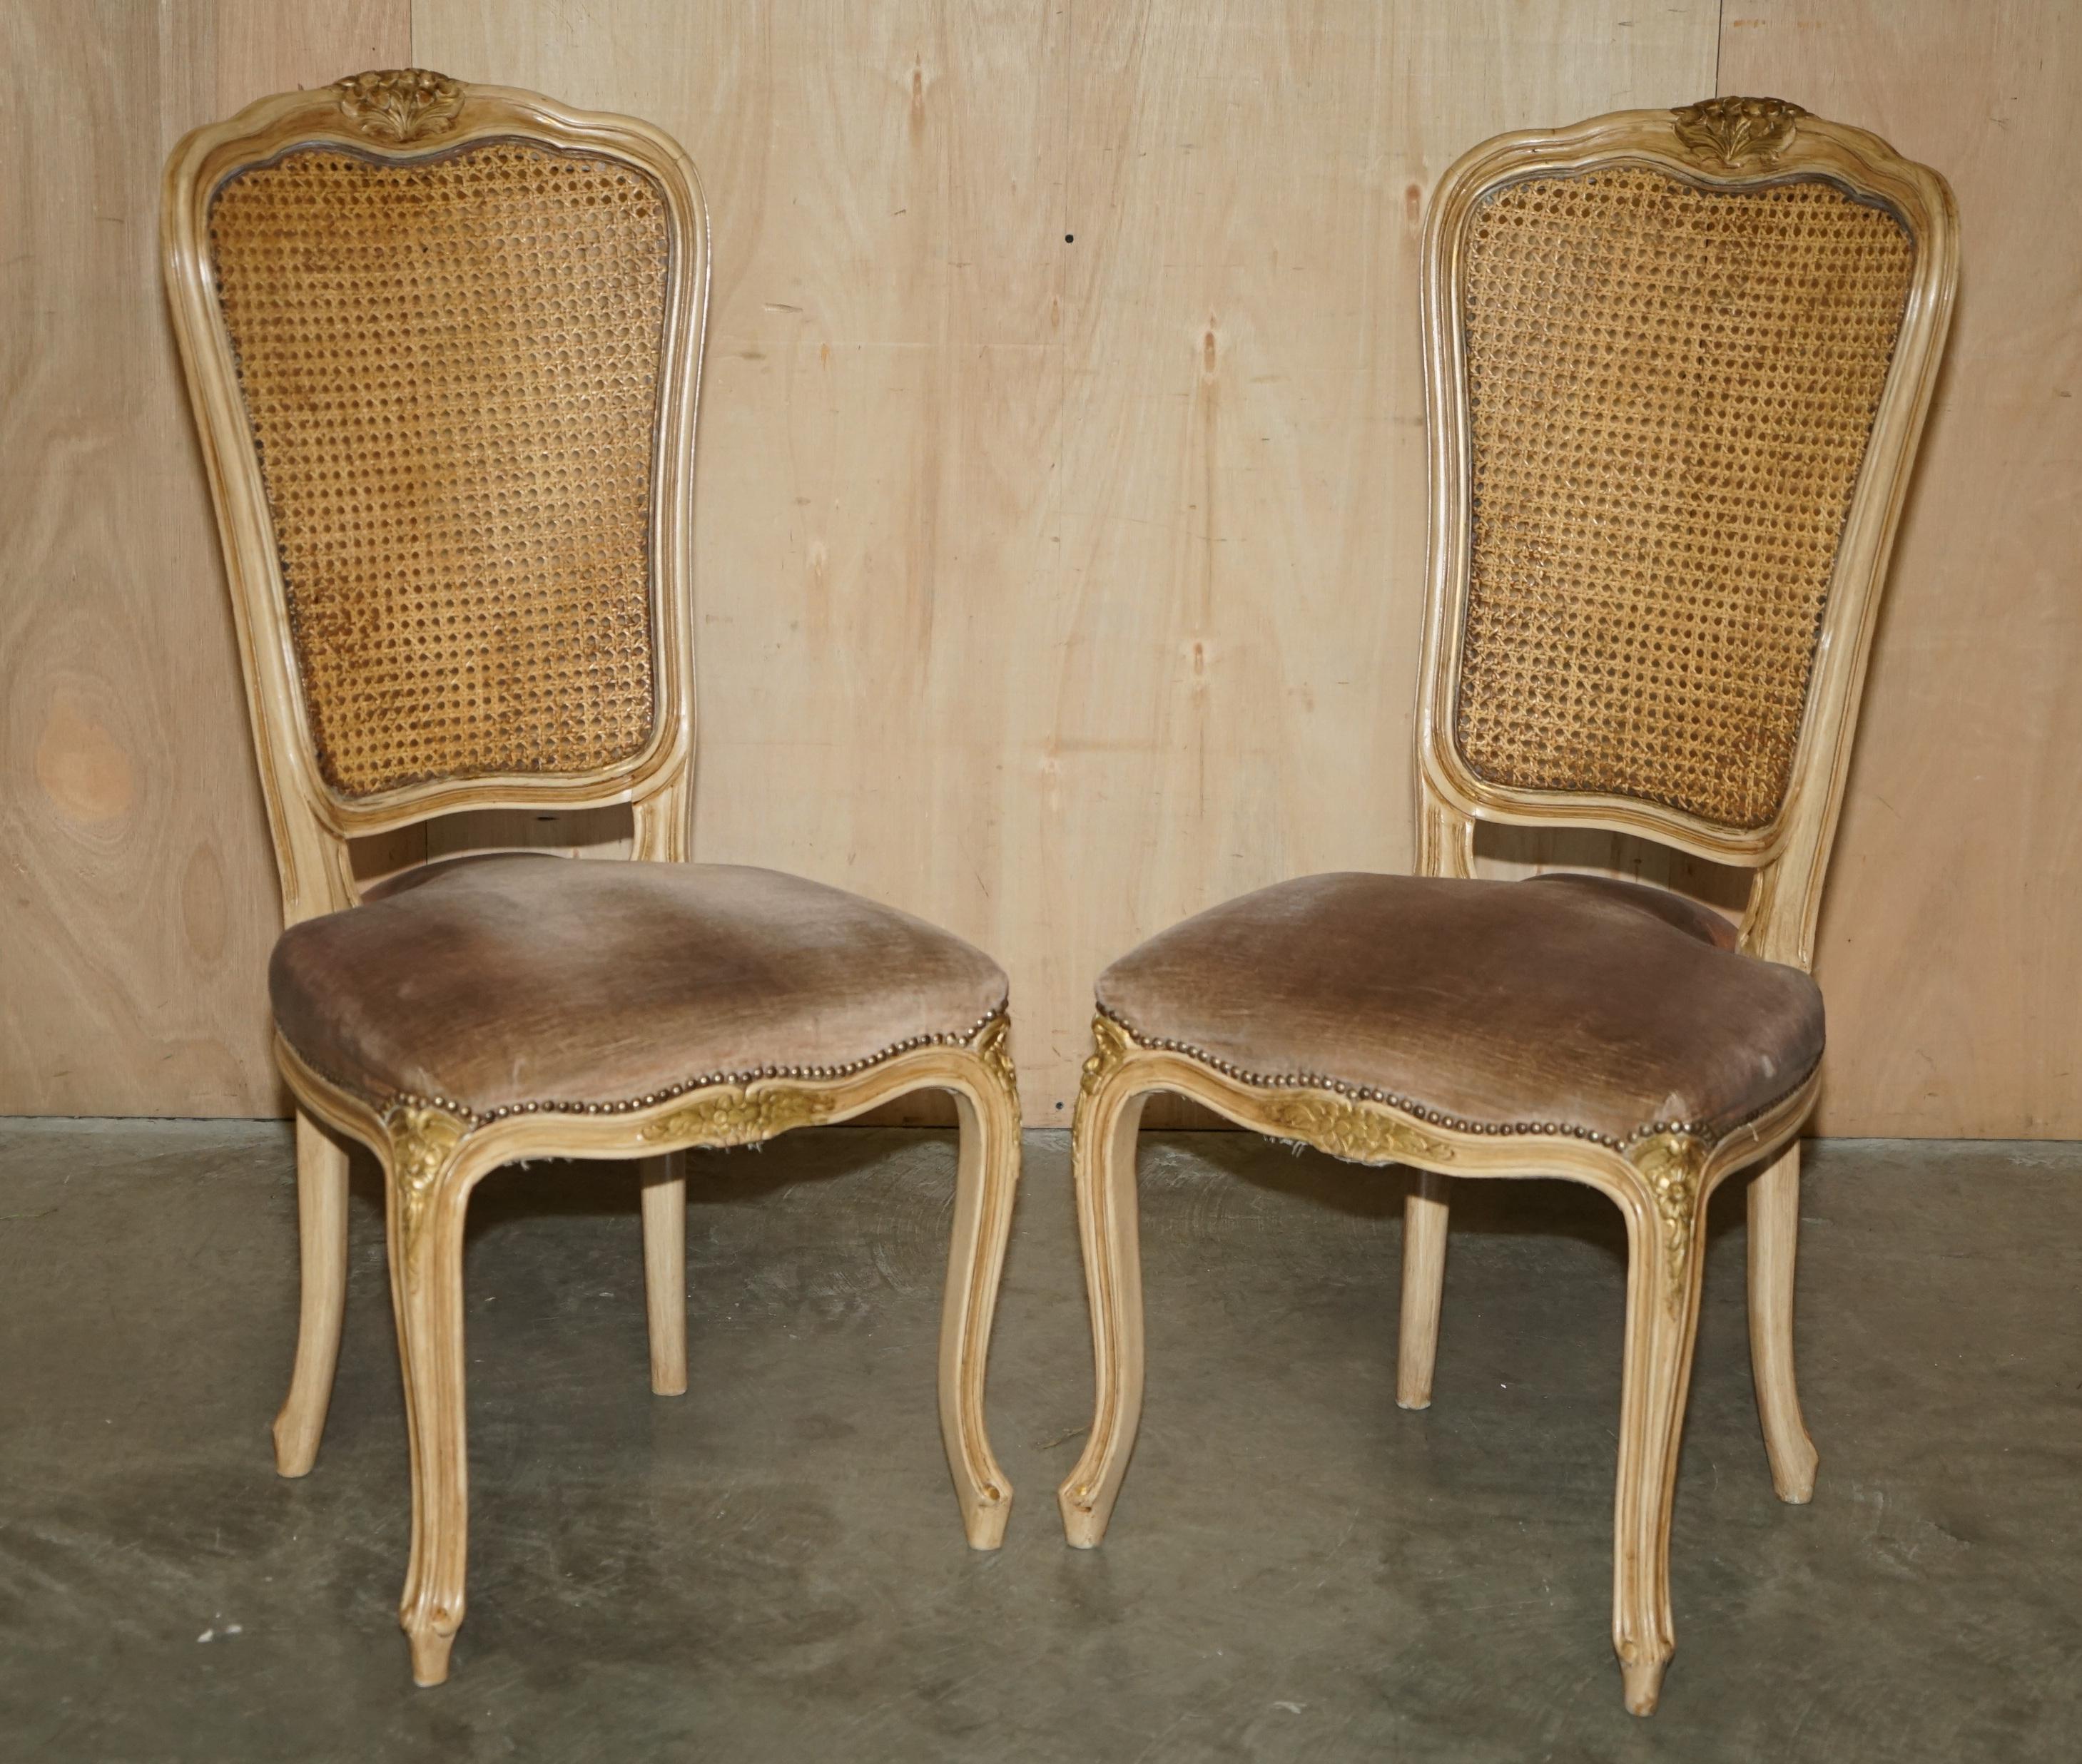 FOUR FINE ANTIQUE FRENCH BERGERE DiNING CHAIRS WITH PERIOD VELOUR UPHOLSTERY For Sale 7